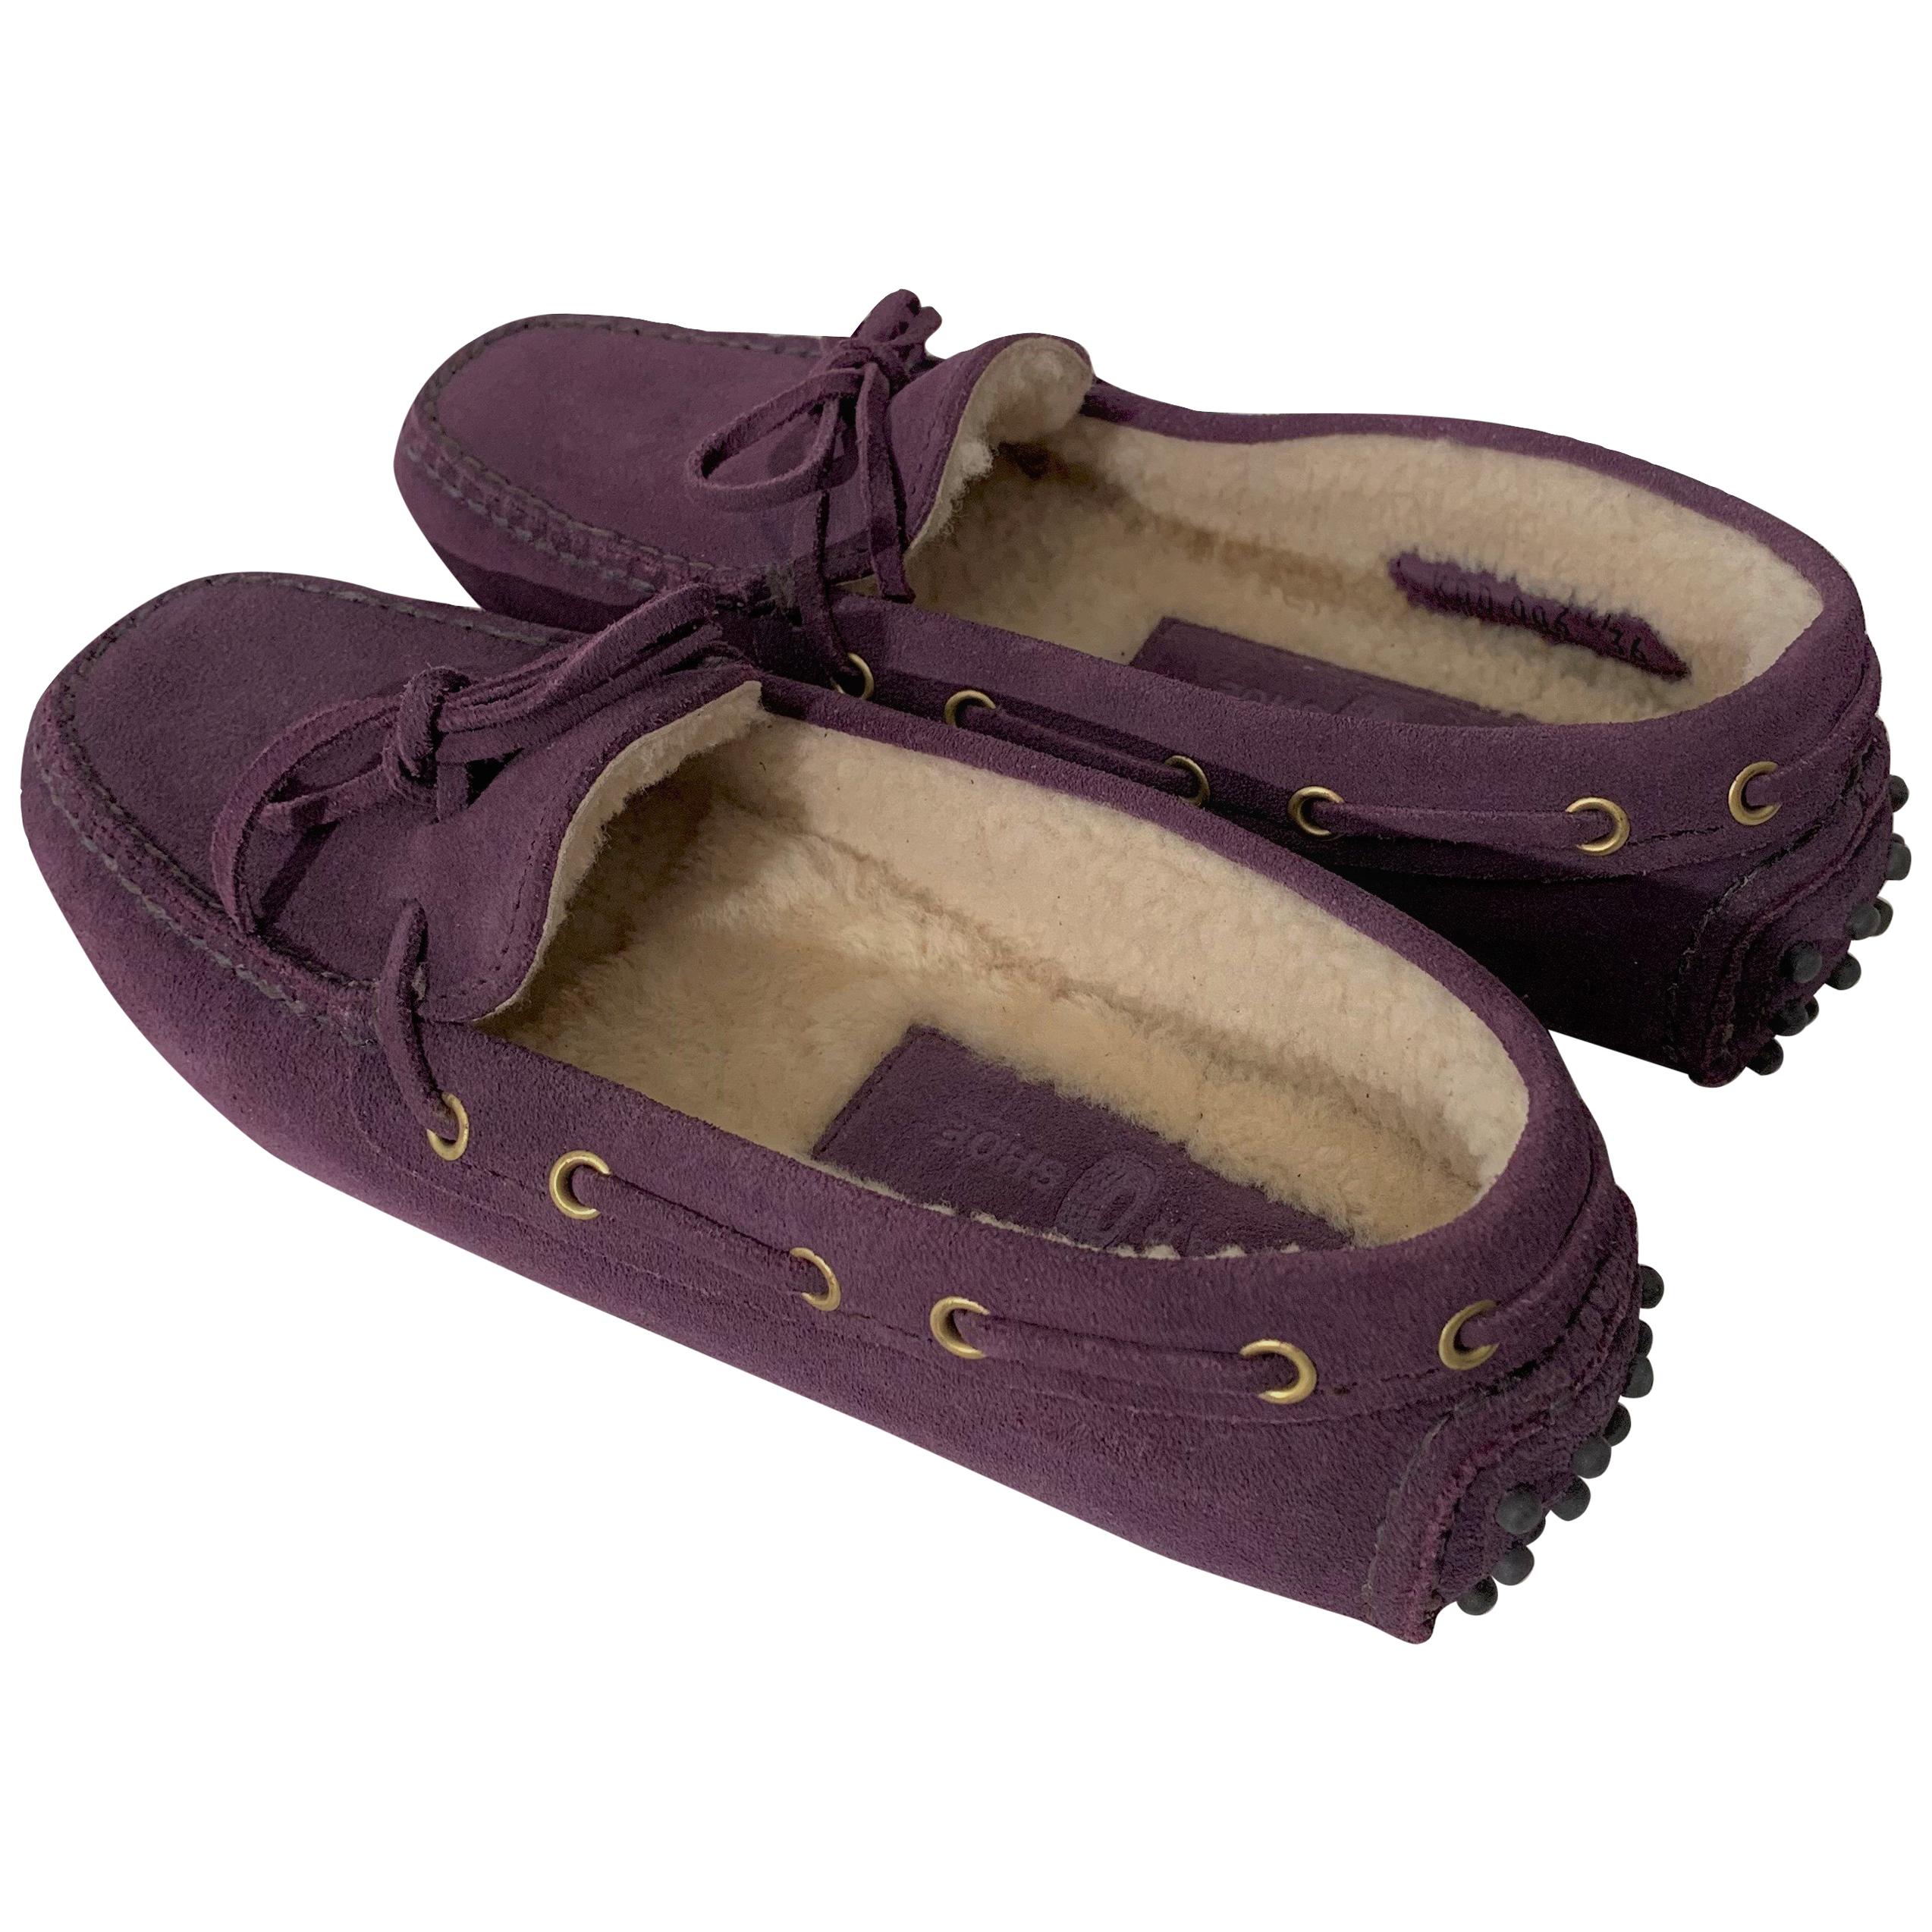 The Original Car Shoe by Prada

Brand New
* Lilac
* Suede
* Shearling Lining
* Gold Hardware
* Bow Toe
* Flat Heel
* Rubber Bumper Sole
* With Box & Dust Cover